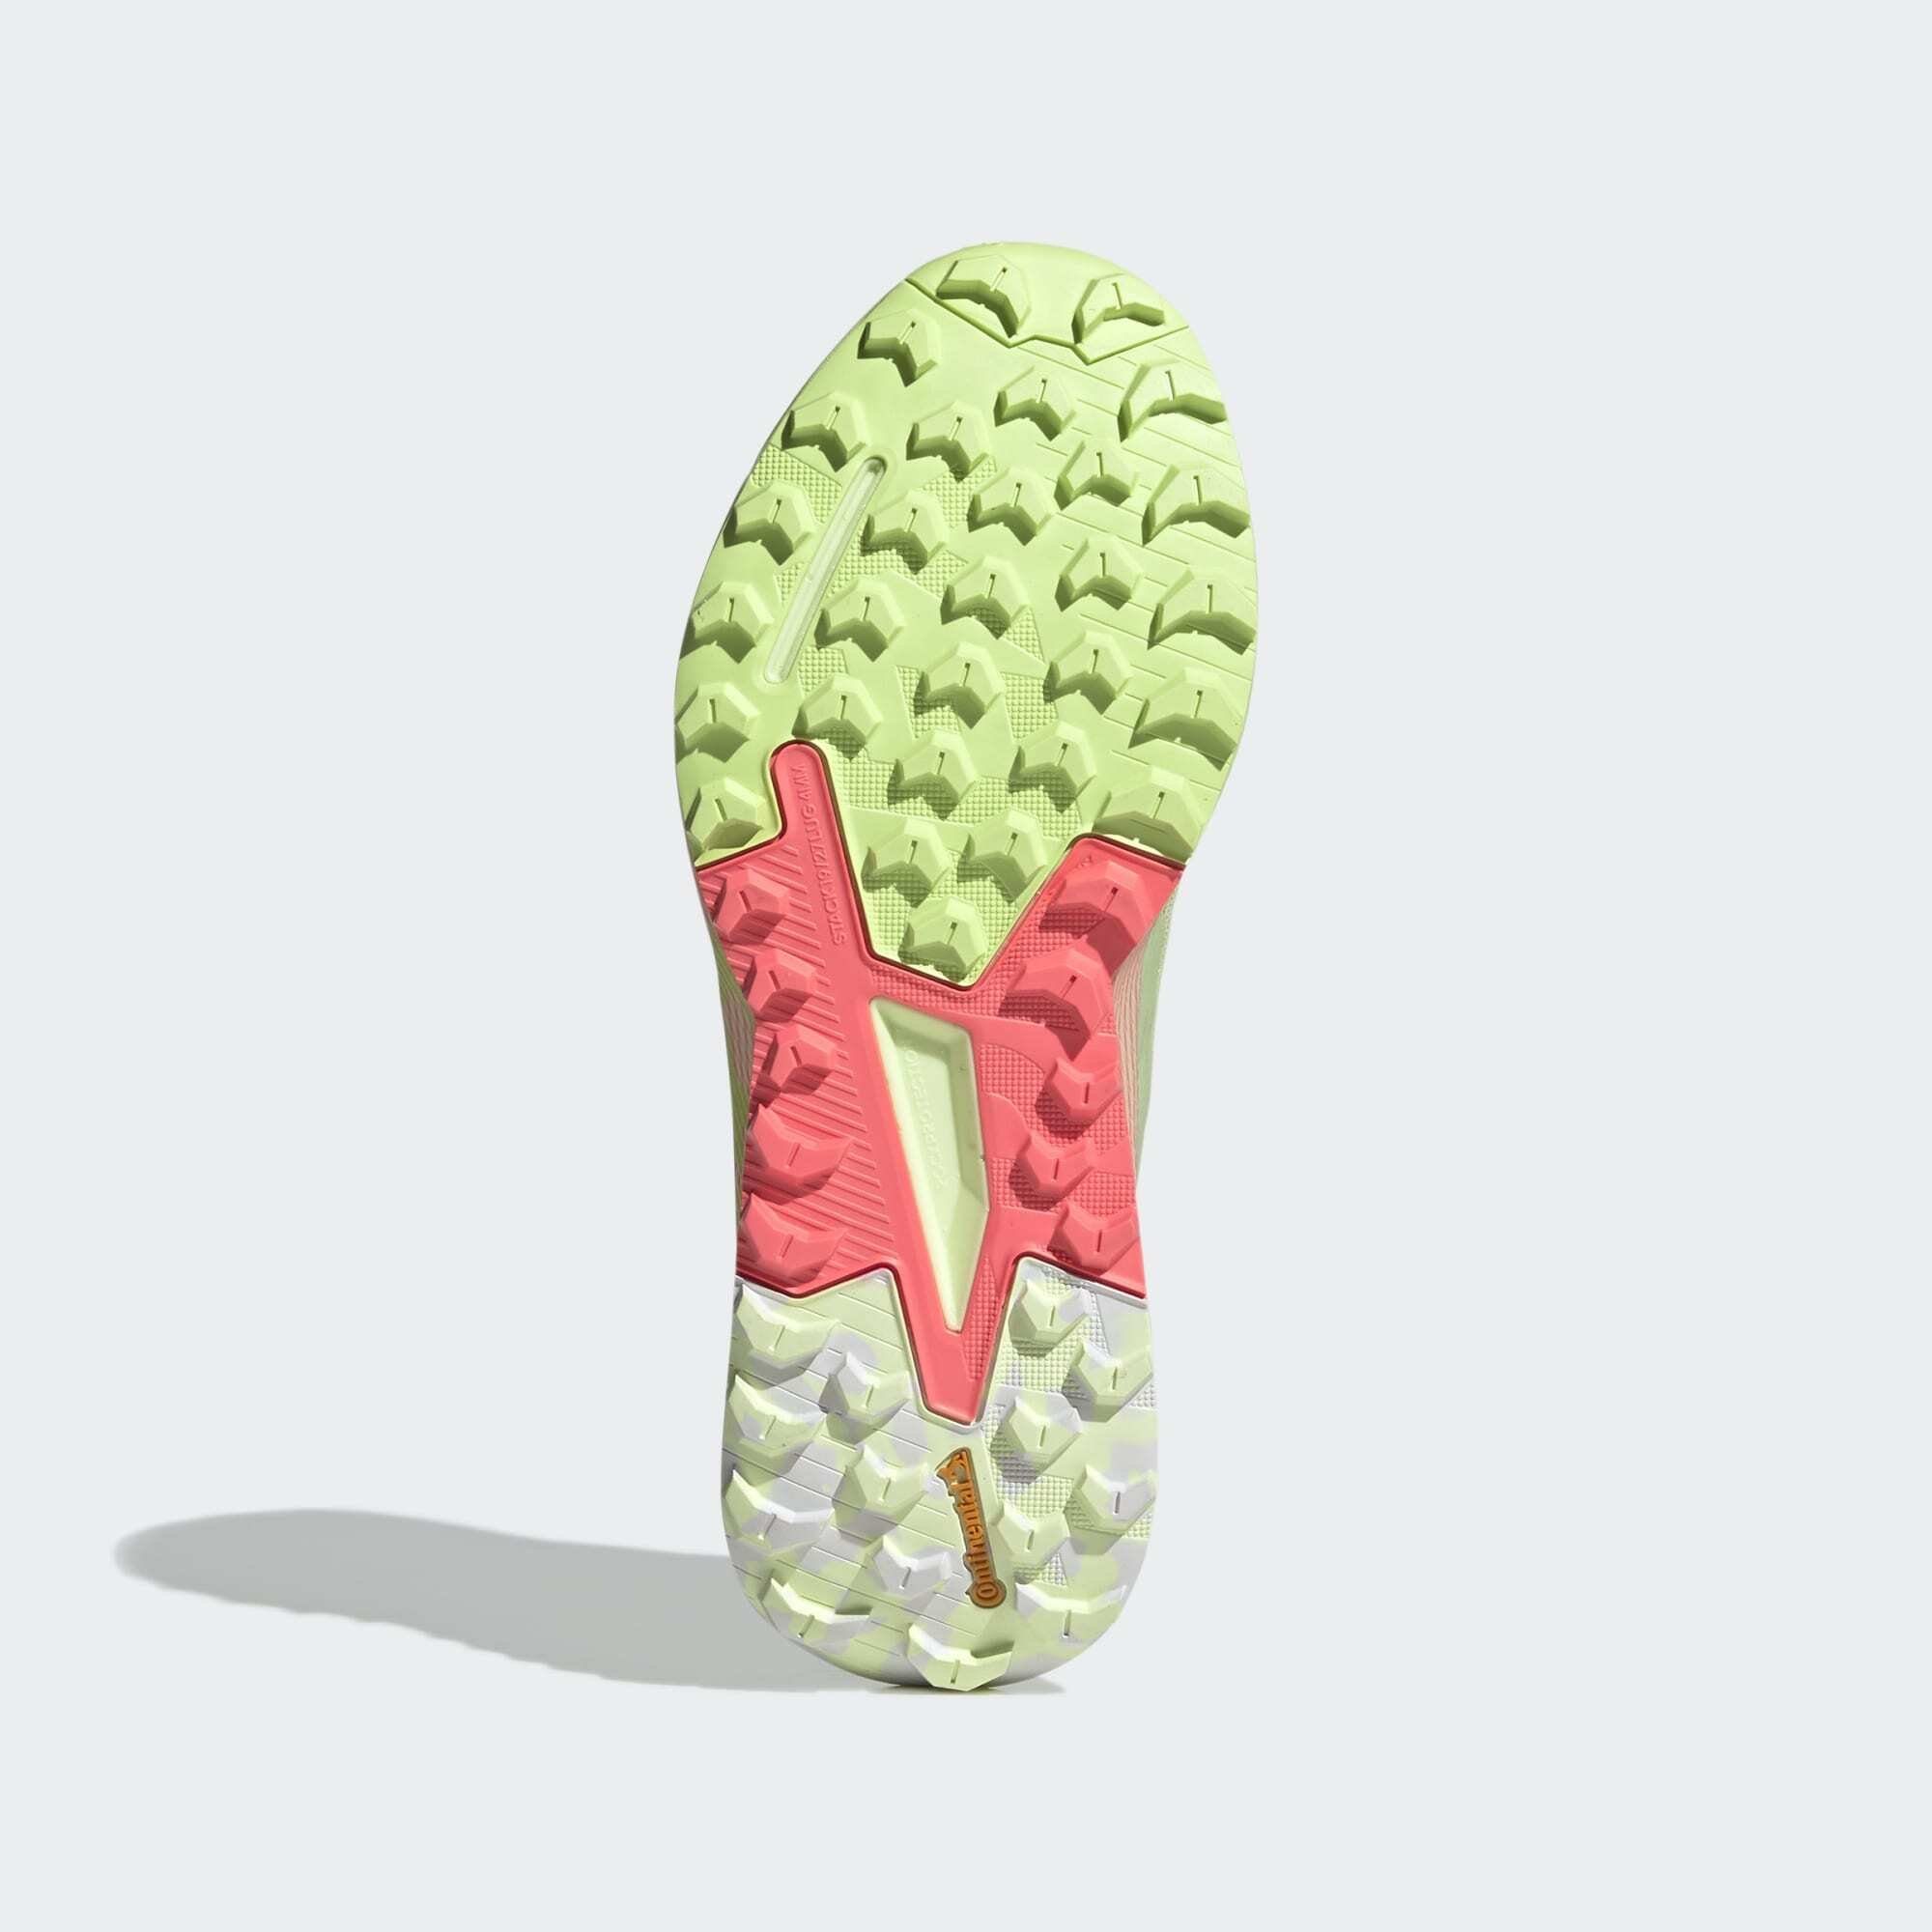 TERREX adidas Almost / Turbo Lime Sneaker Pulse Lime /